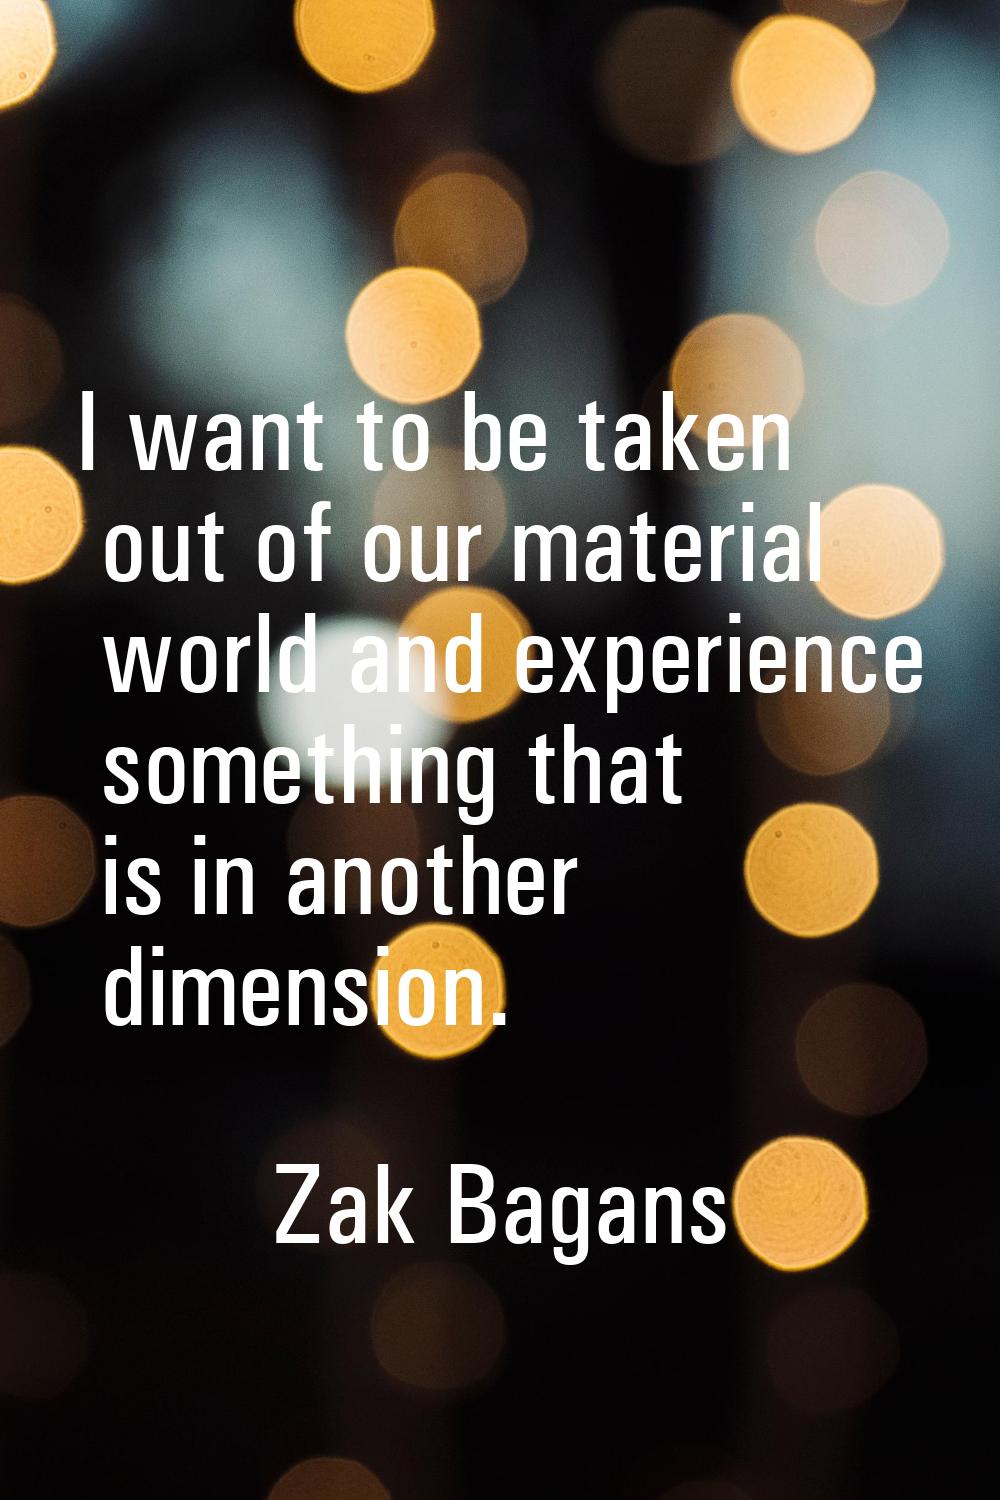 I want to be taken out of our material world and experience something that is in another dimension.